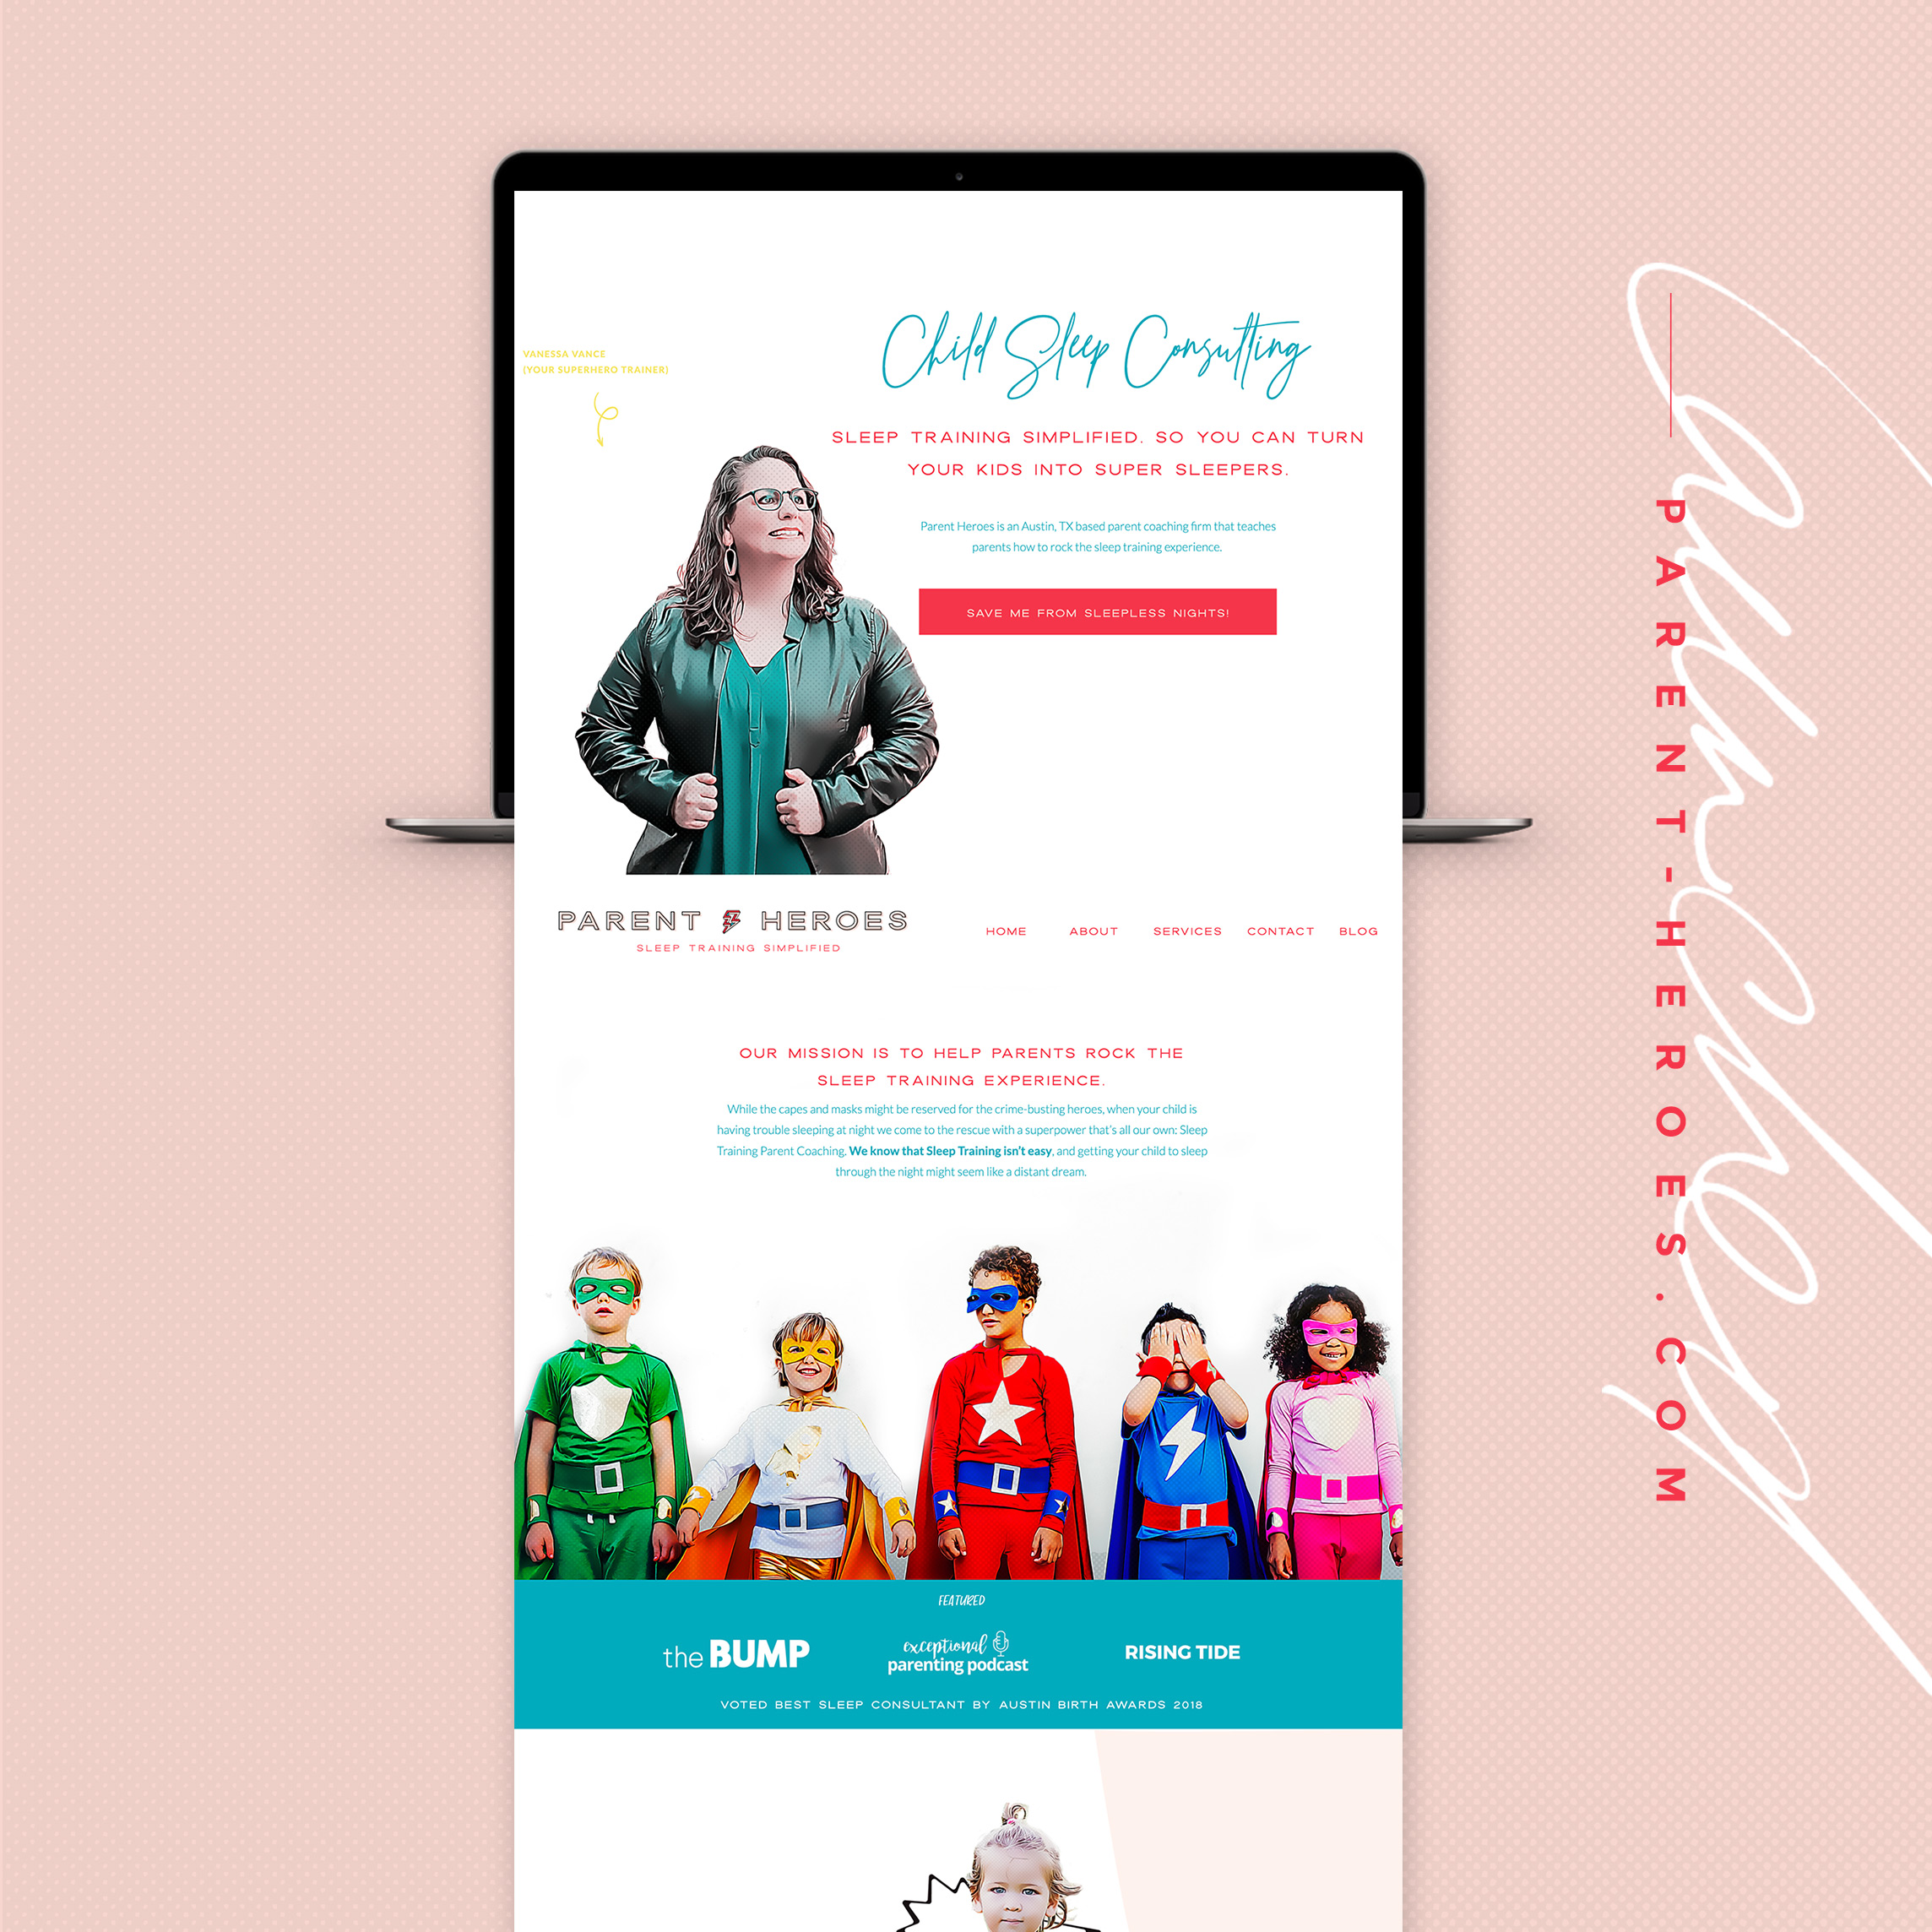 A child sleep consultant brand for Parent Heroes located in Austin, Texas. Check out the brand and Showit website design by Carrylove Designs.